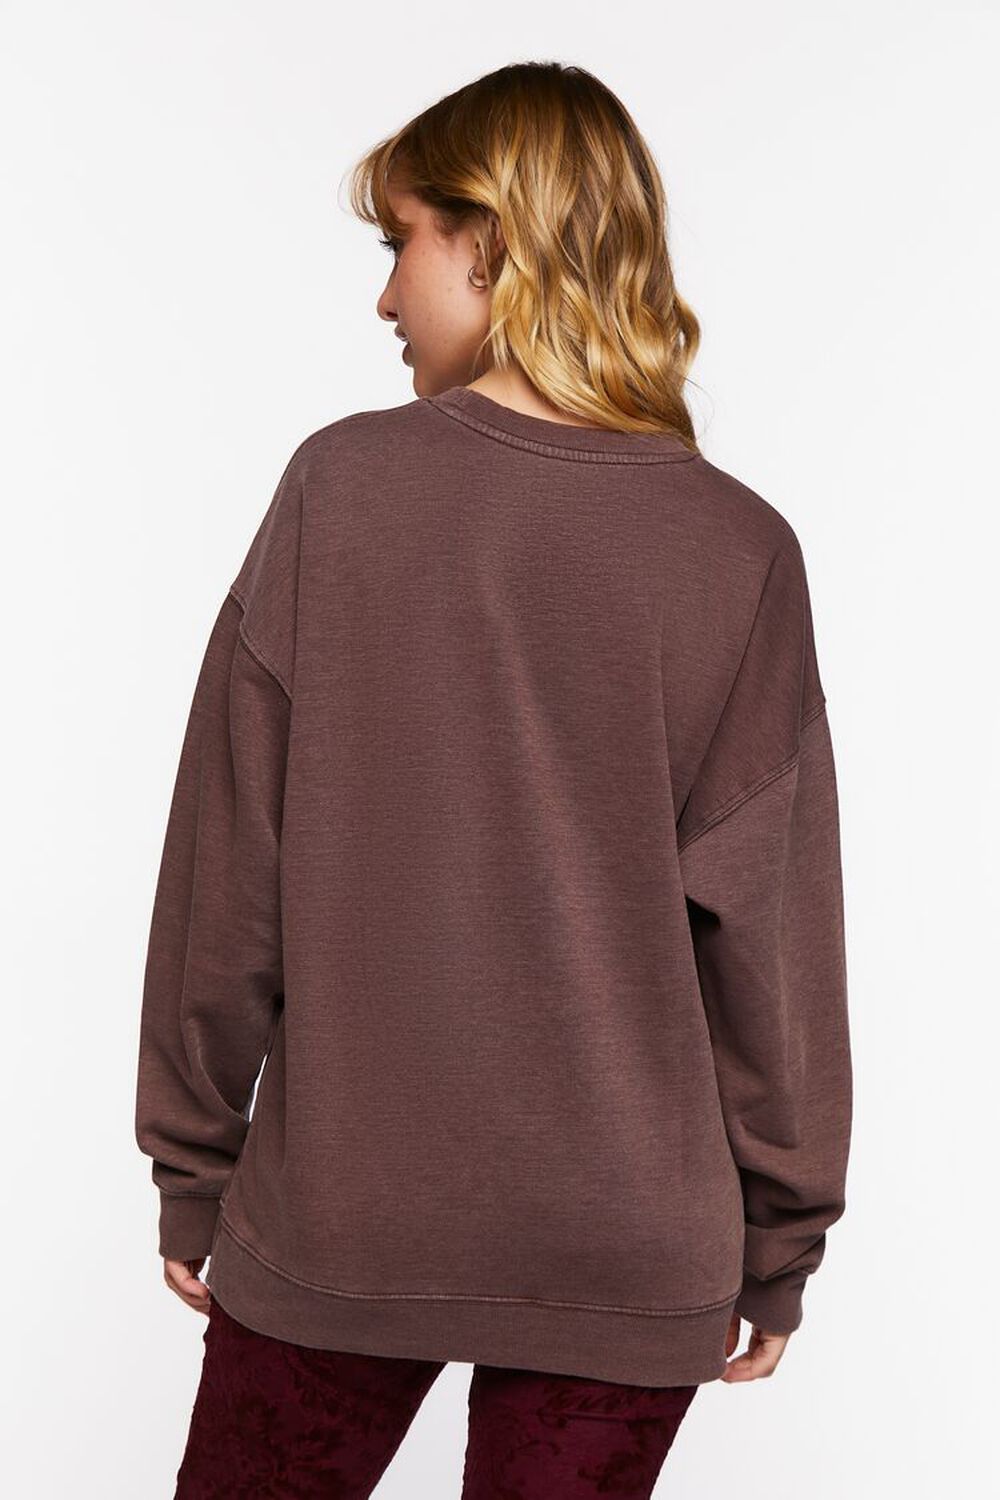 BROWN/MULTI Oversized Whitney Houston Graphic Pullover, image 3